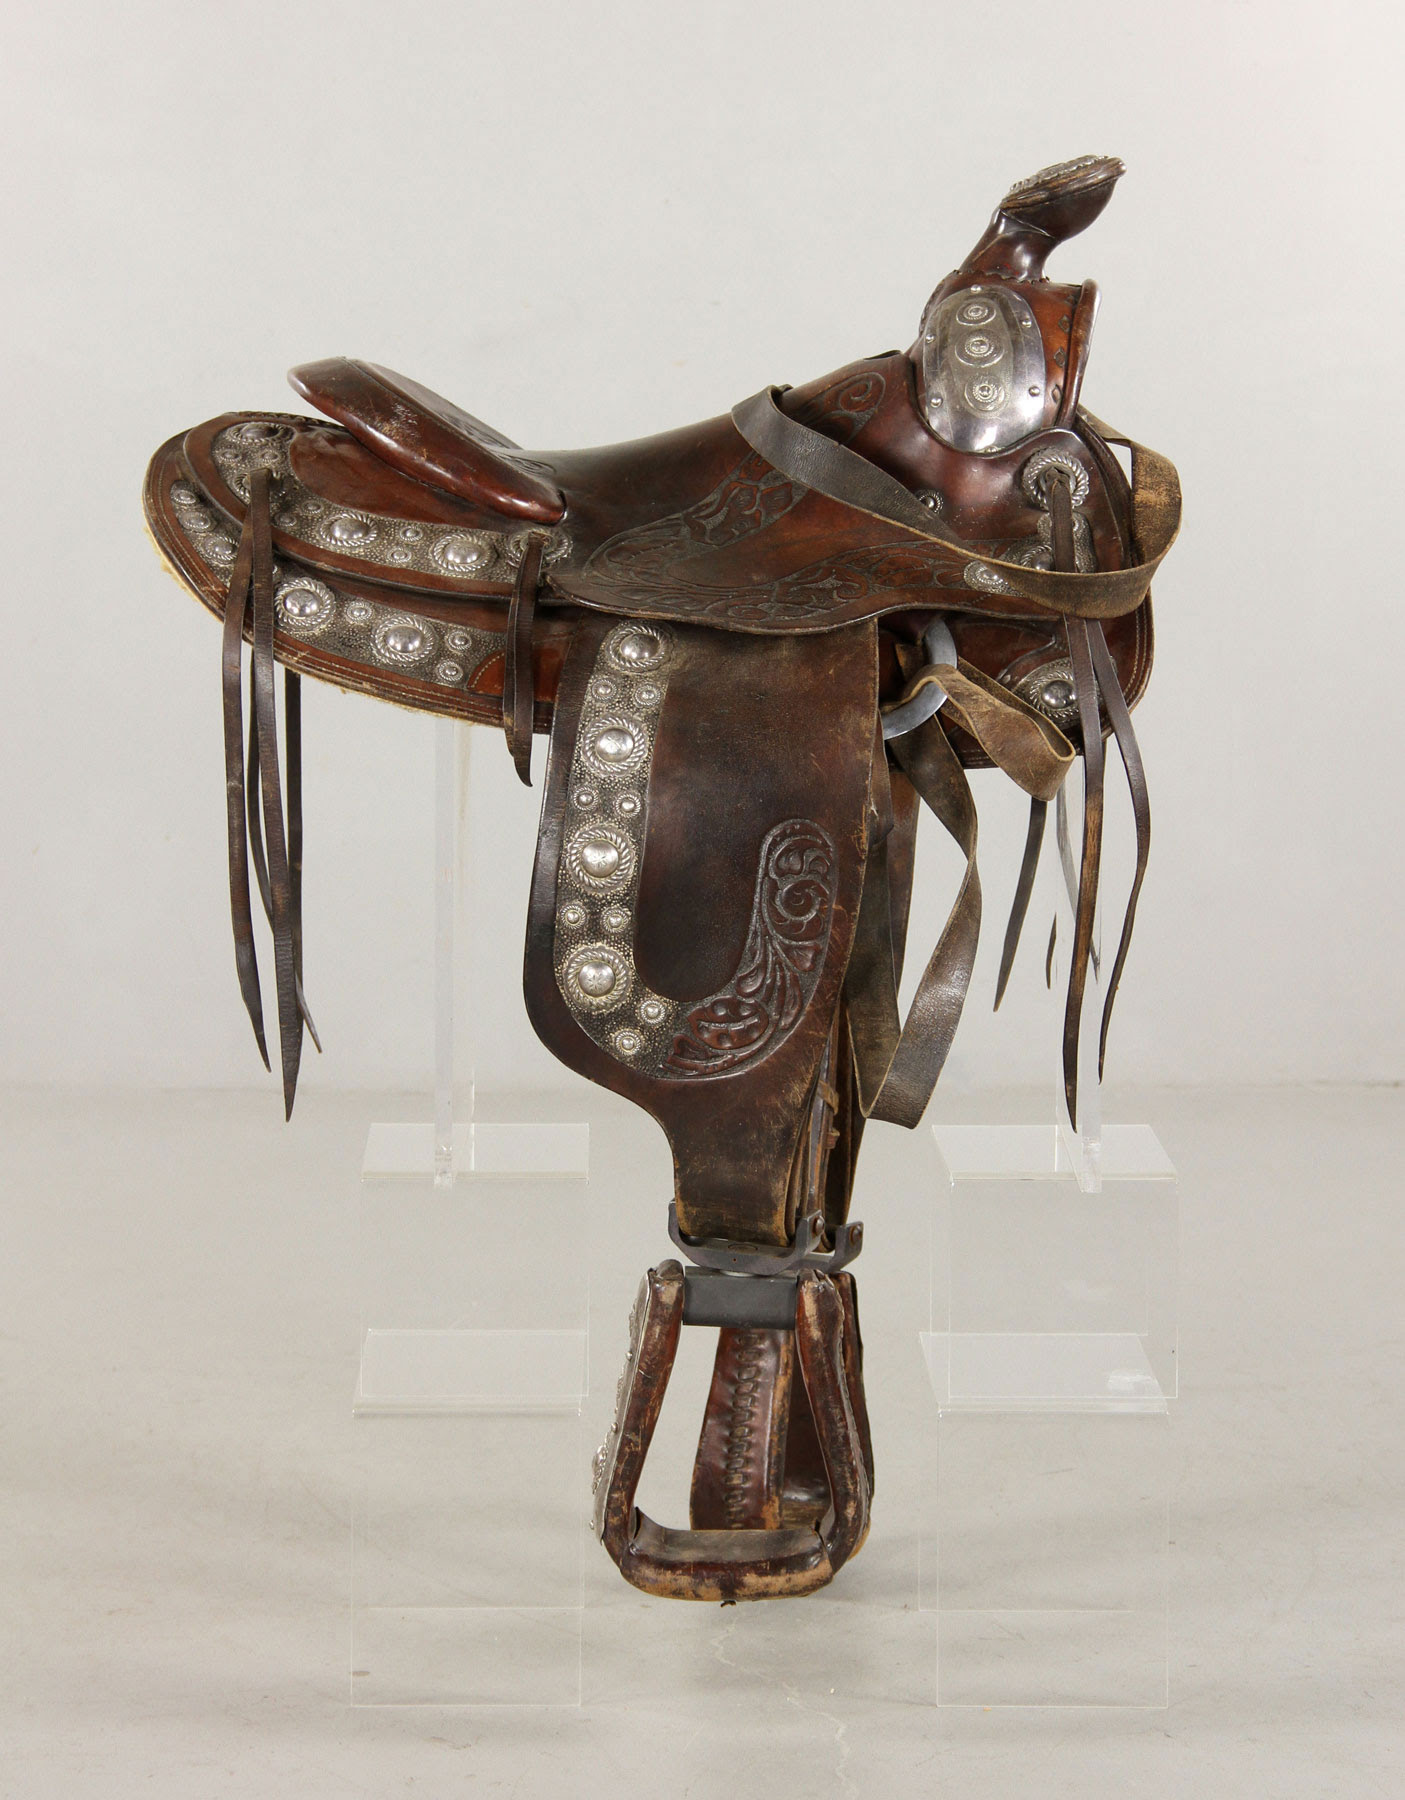 TV cowboy Rex Trailer rode high in this saddle, which sold for $4,200. Kaminski Auctions image